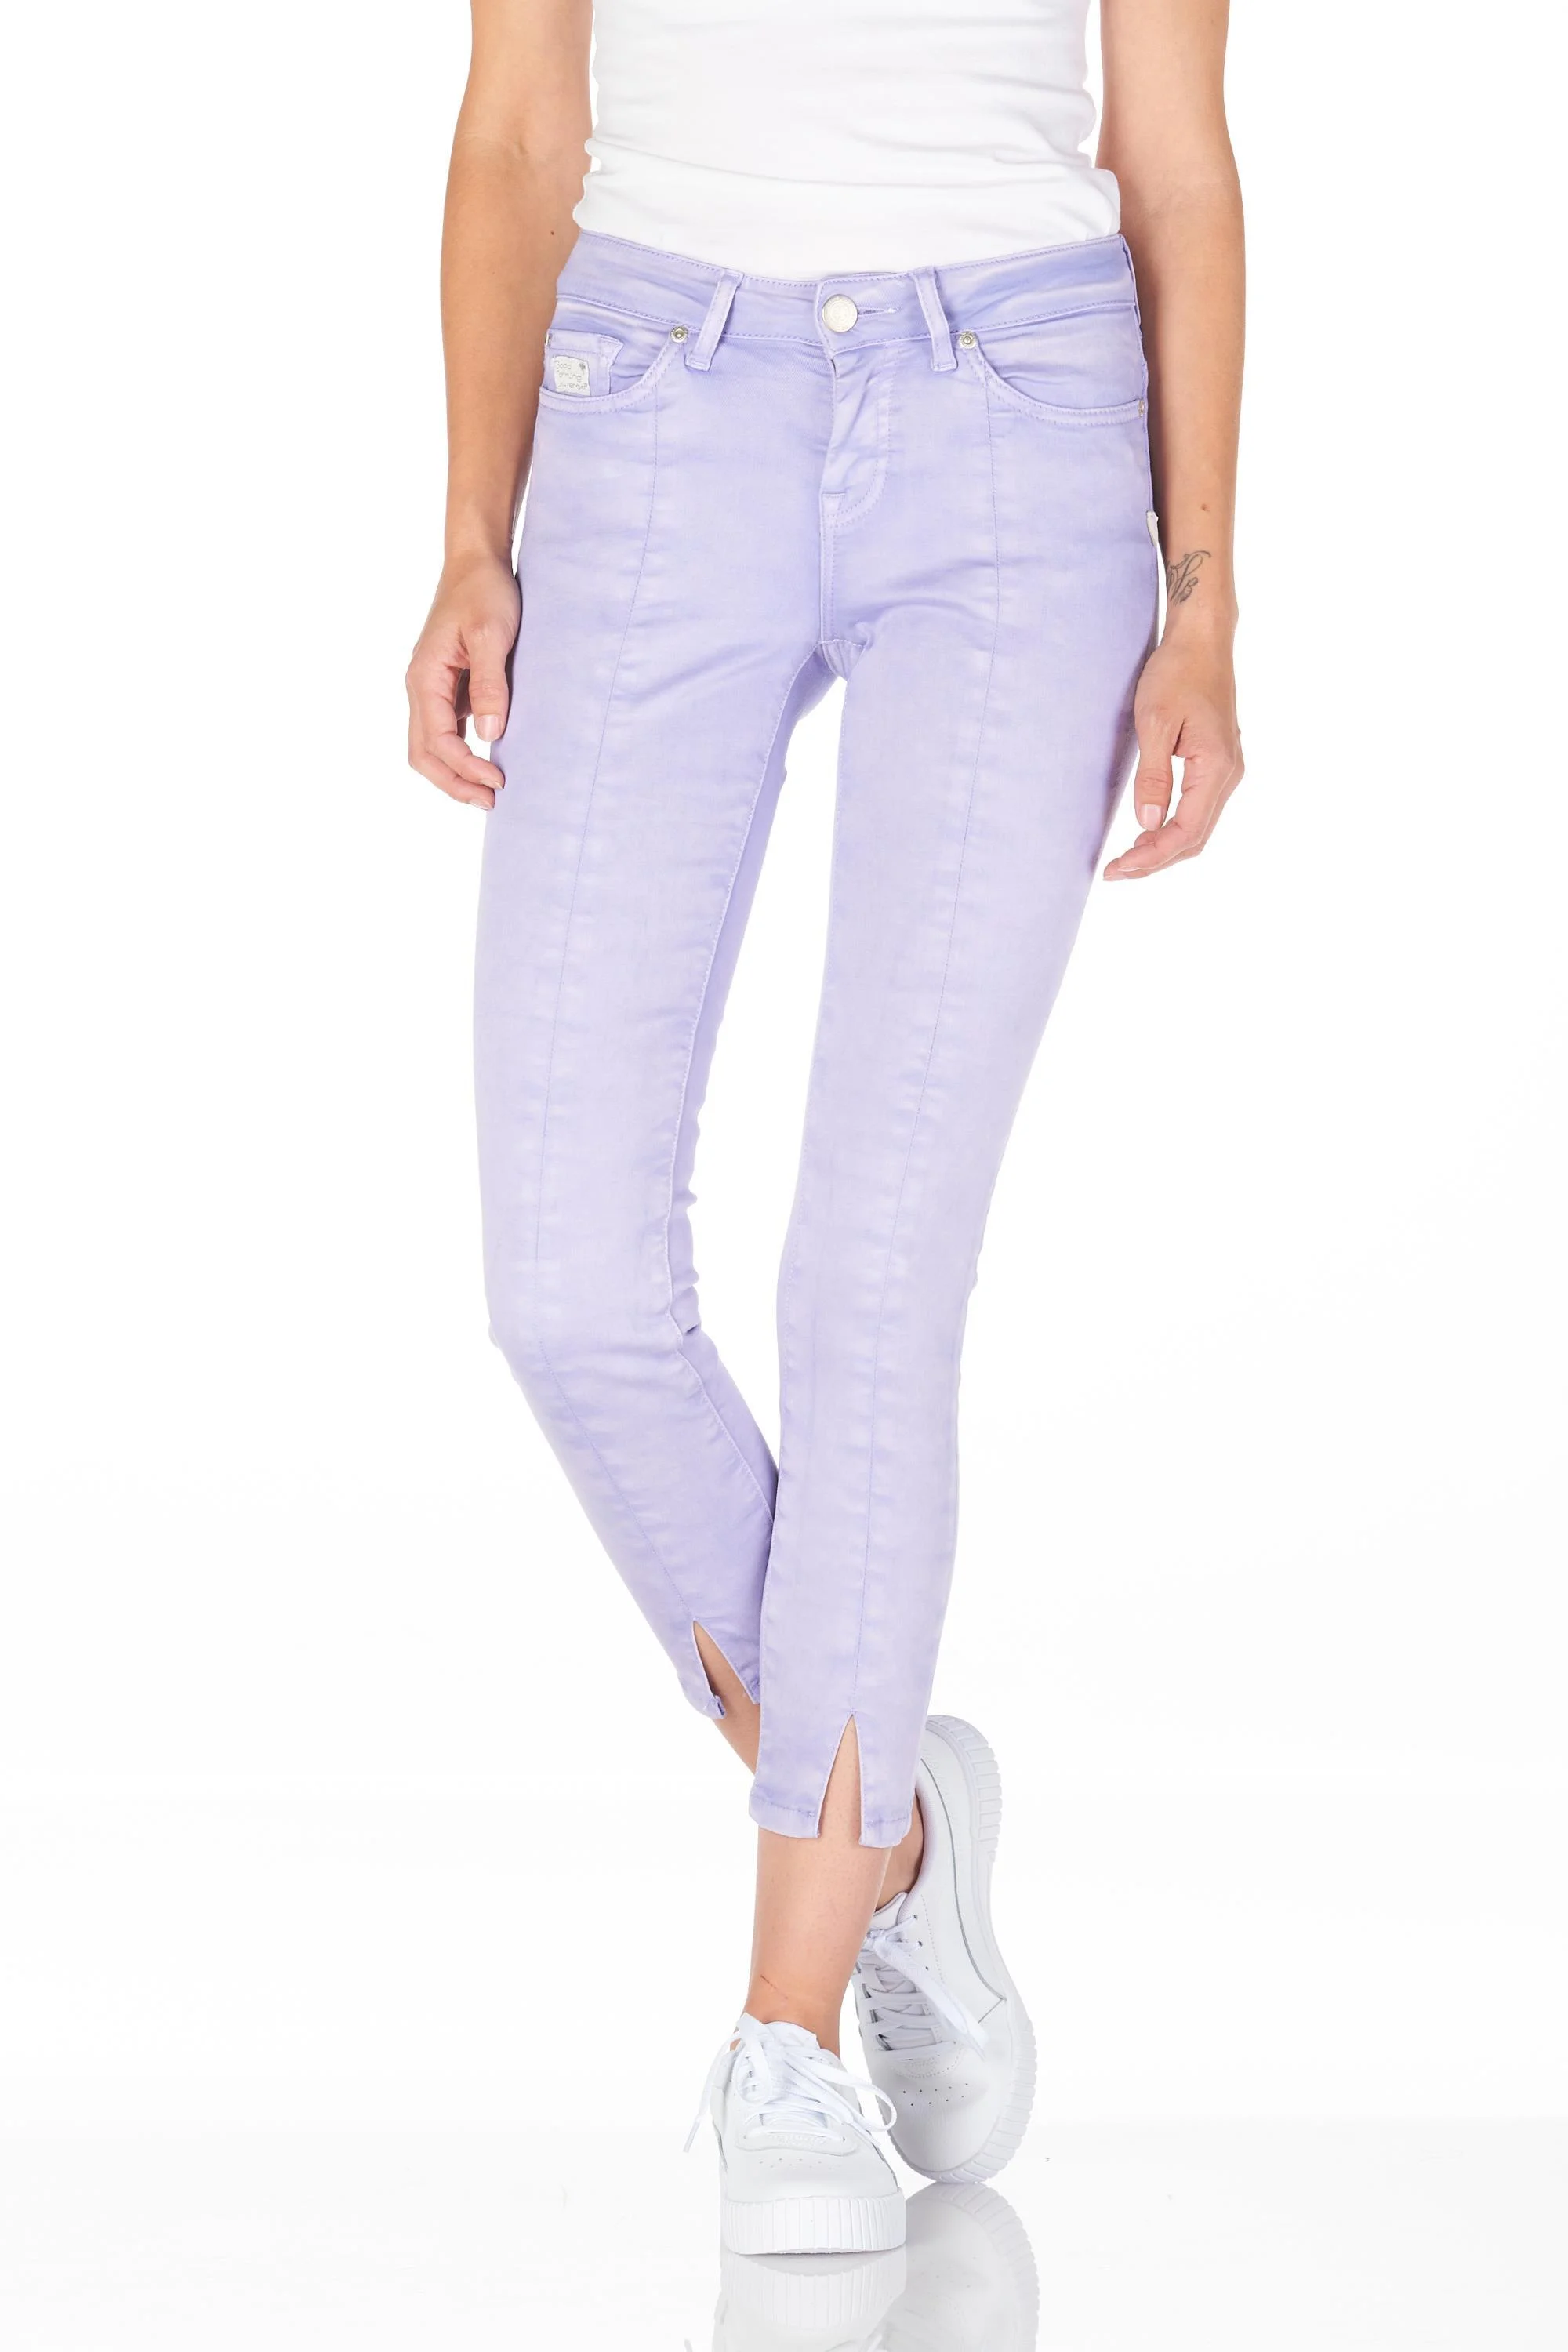 Ornella pearl dyed lavender